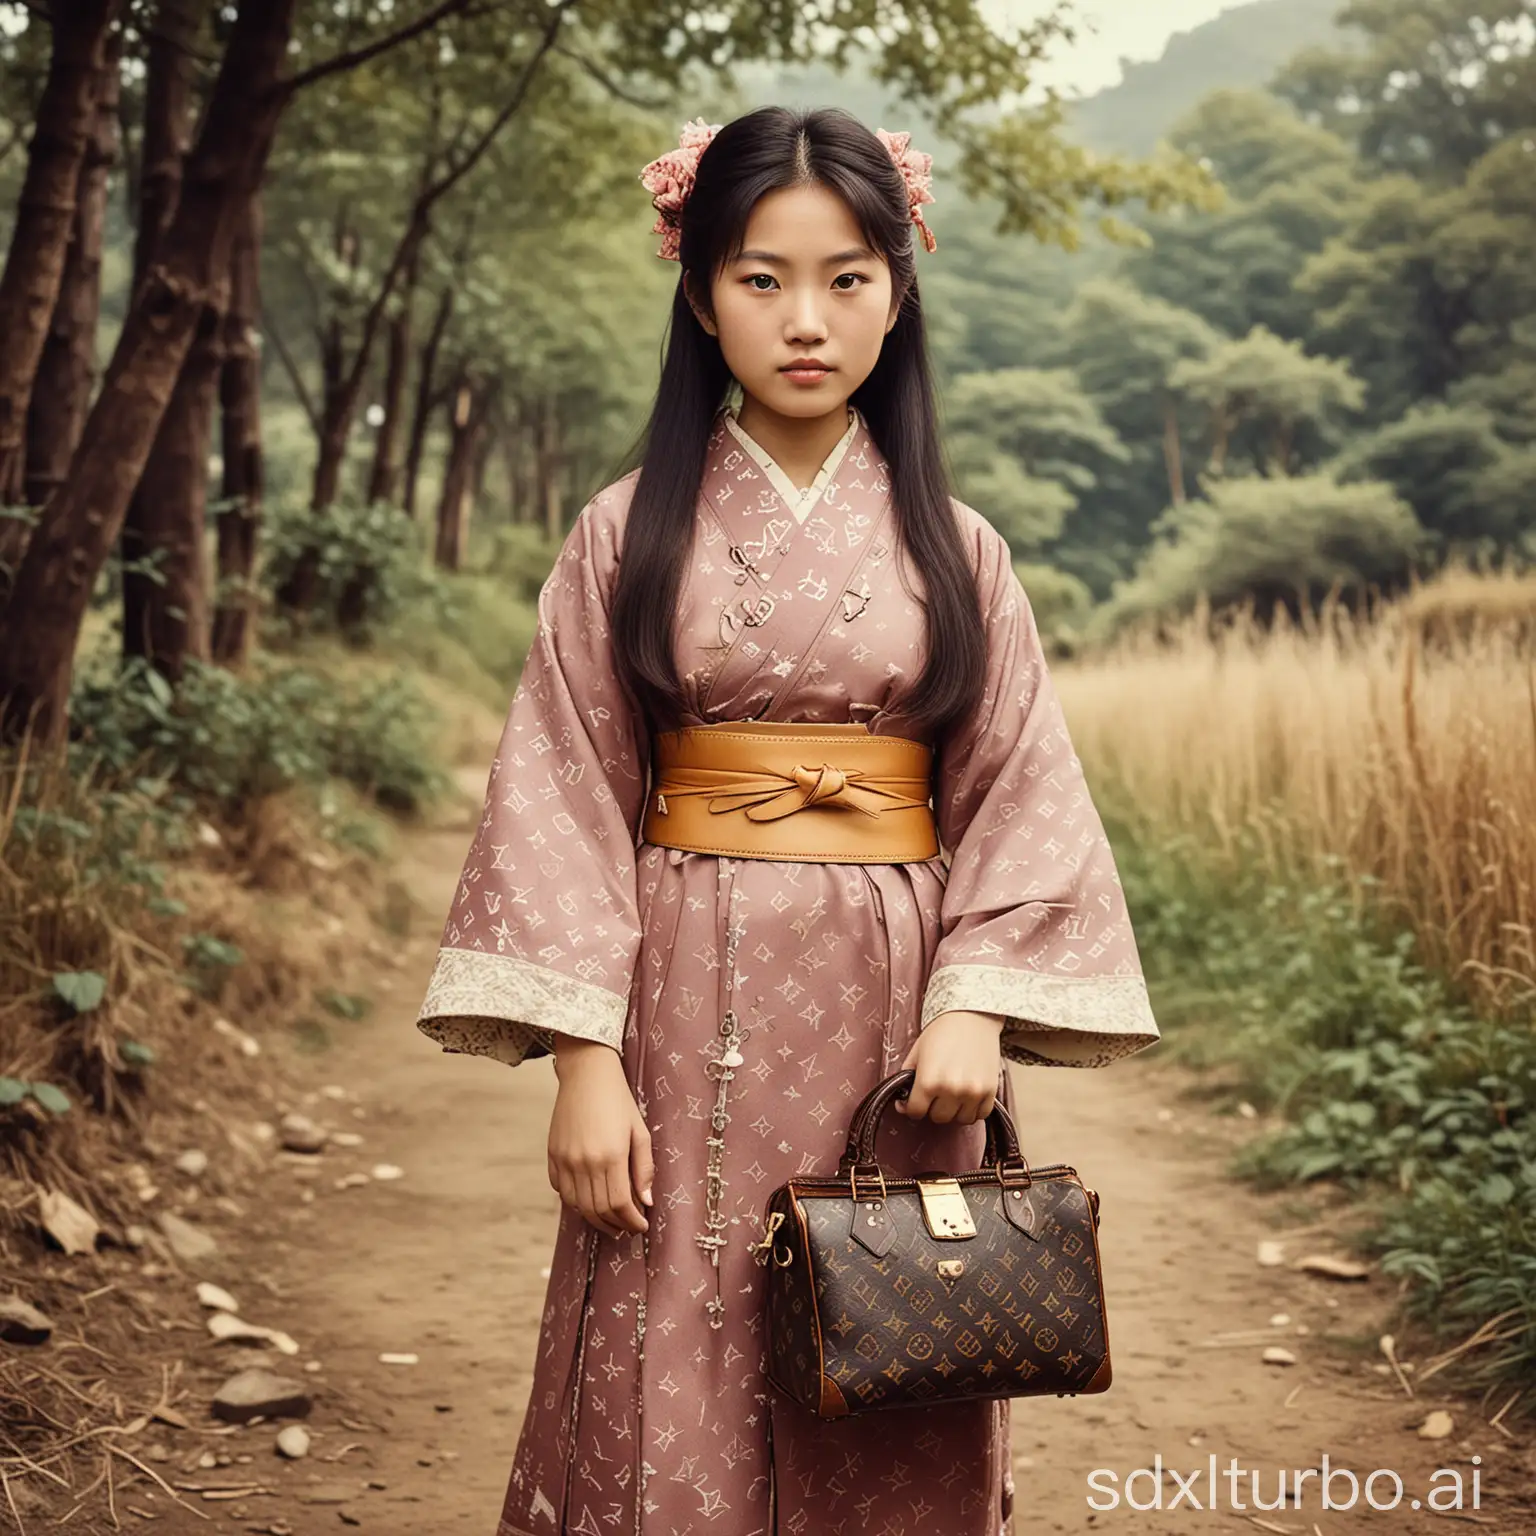 vintage photograph of a rural Japanese girl wearing Louis Vuitton brand, circa 1867, colorized